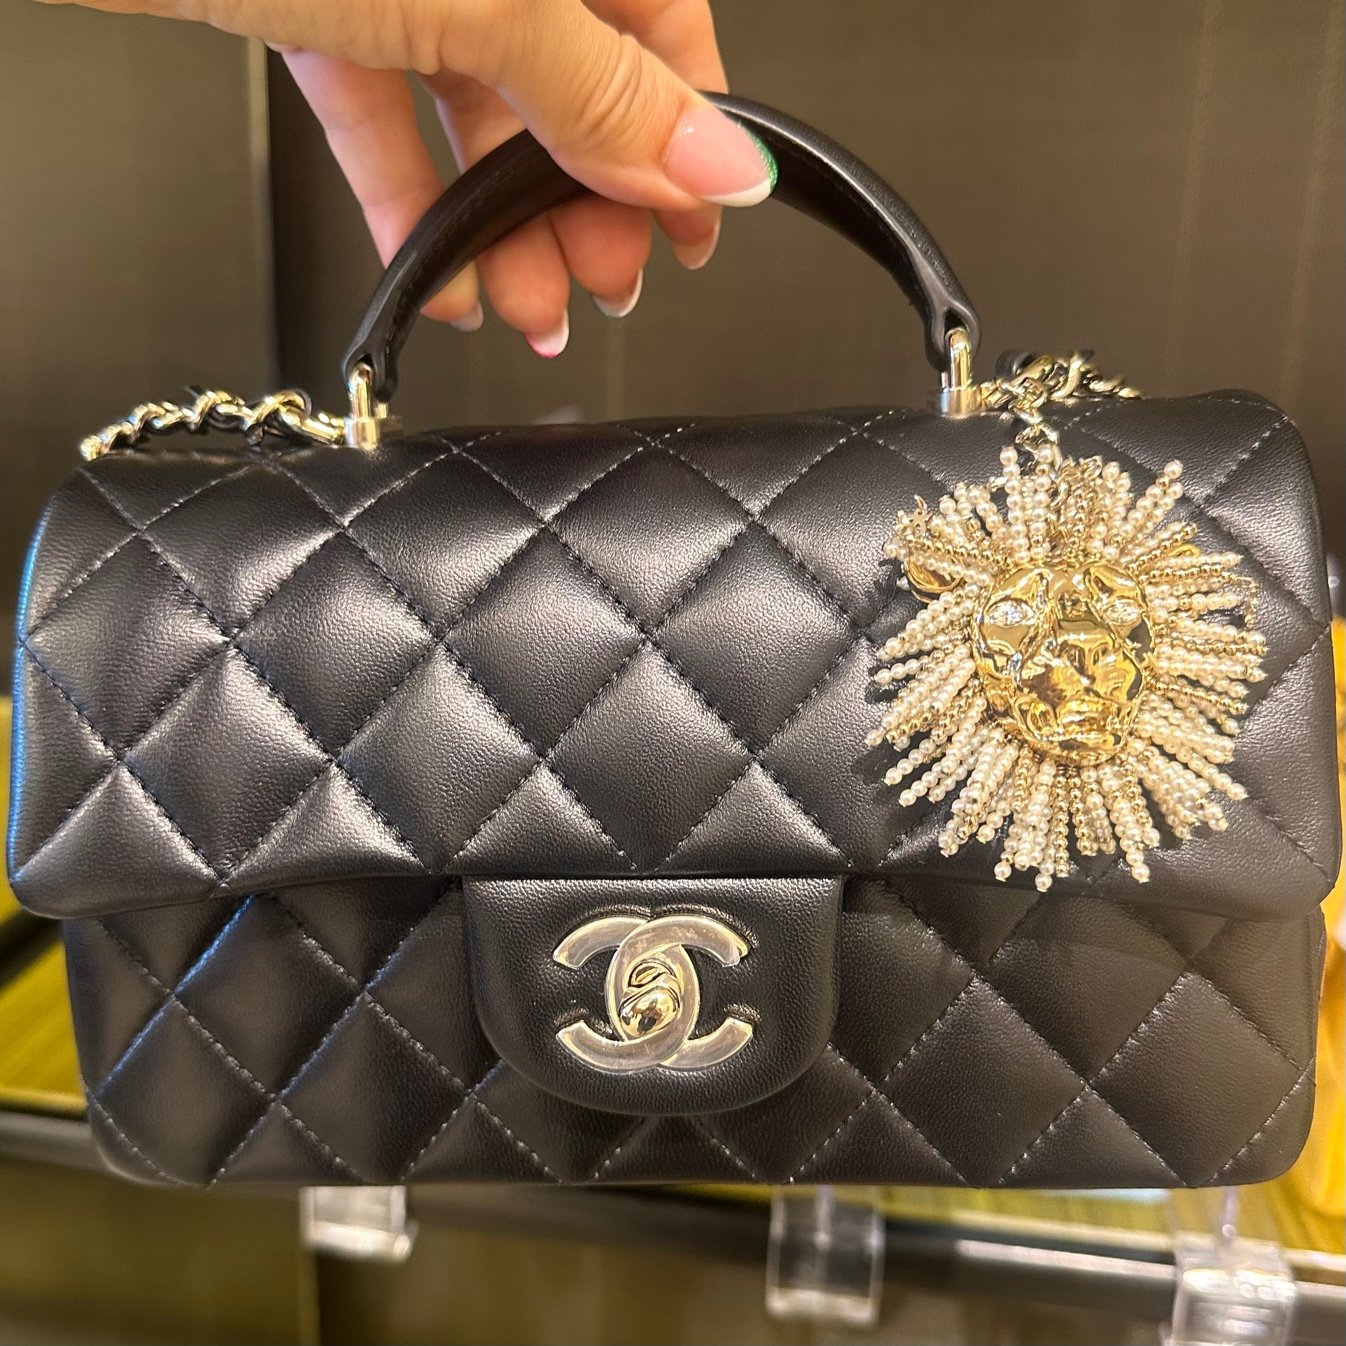 How To Spot A Fake Chanel 255 Bag From Scammers  Bragmybag